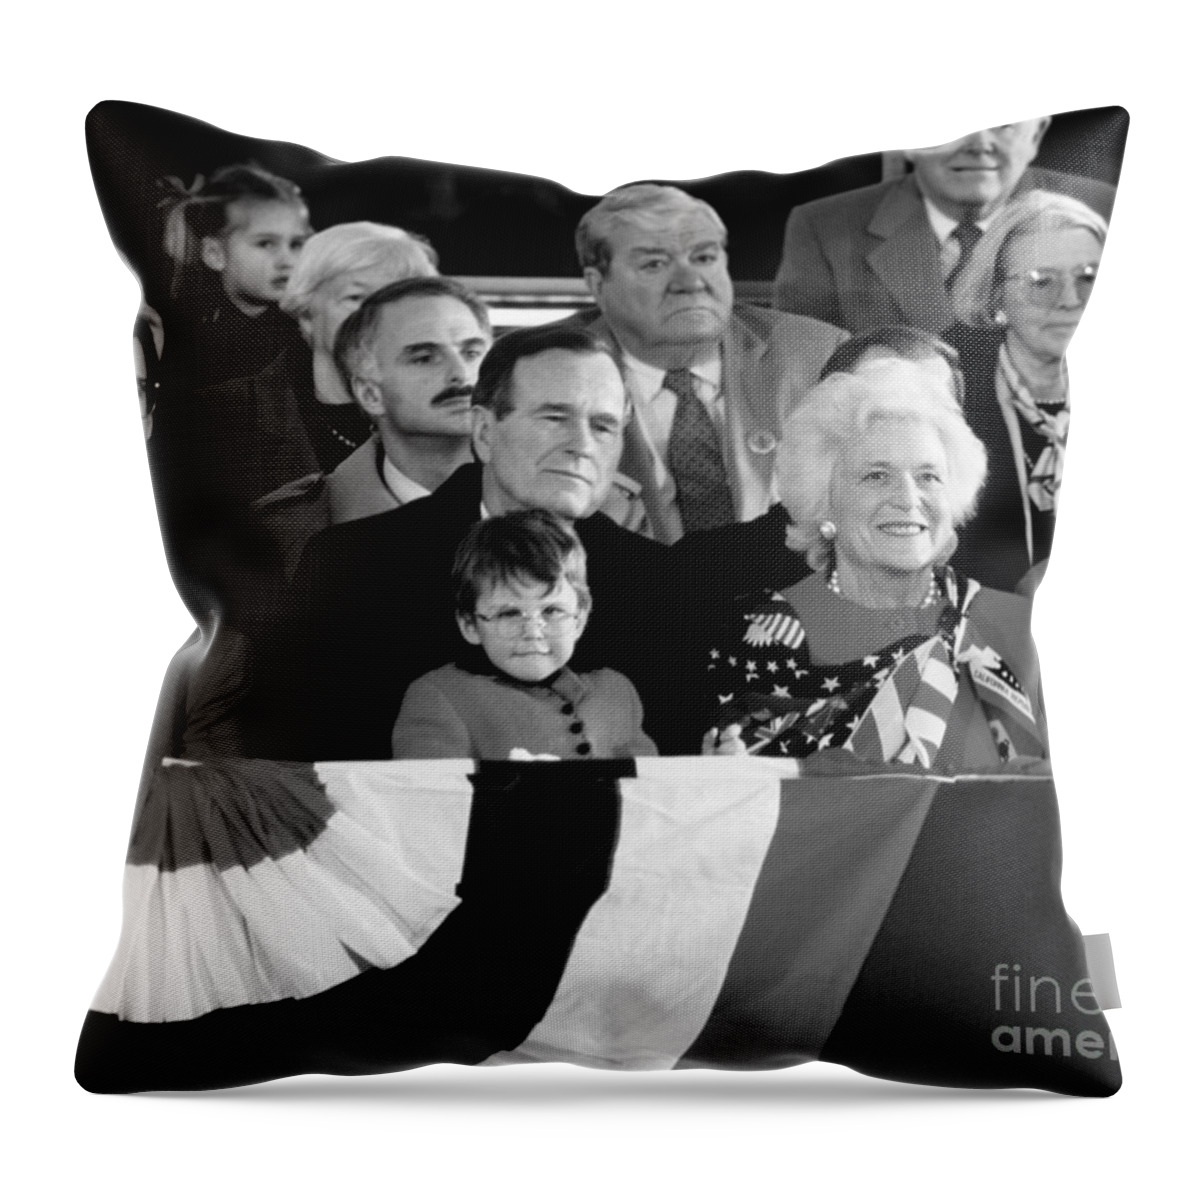 1989 Throw Pillow featuring the photograph Inauguration Of George Bush Sr by H. Armstrong Roberts/ClassicStock